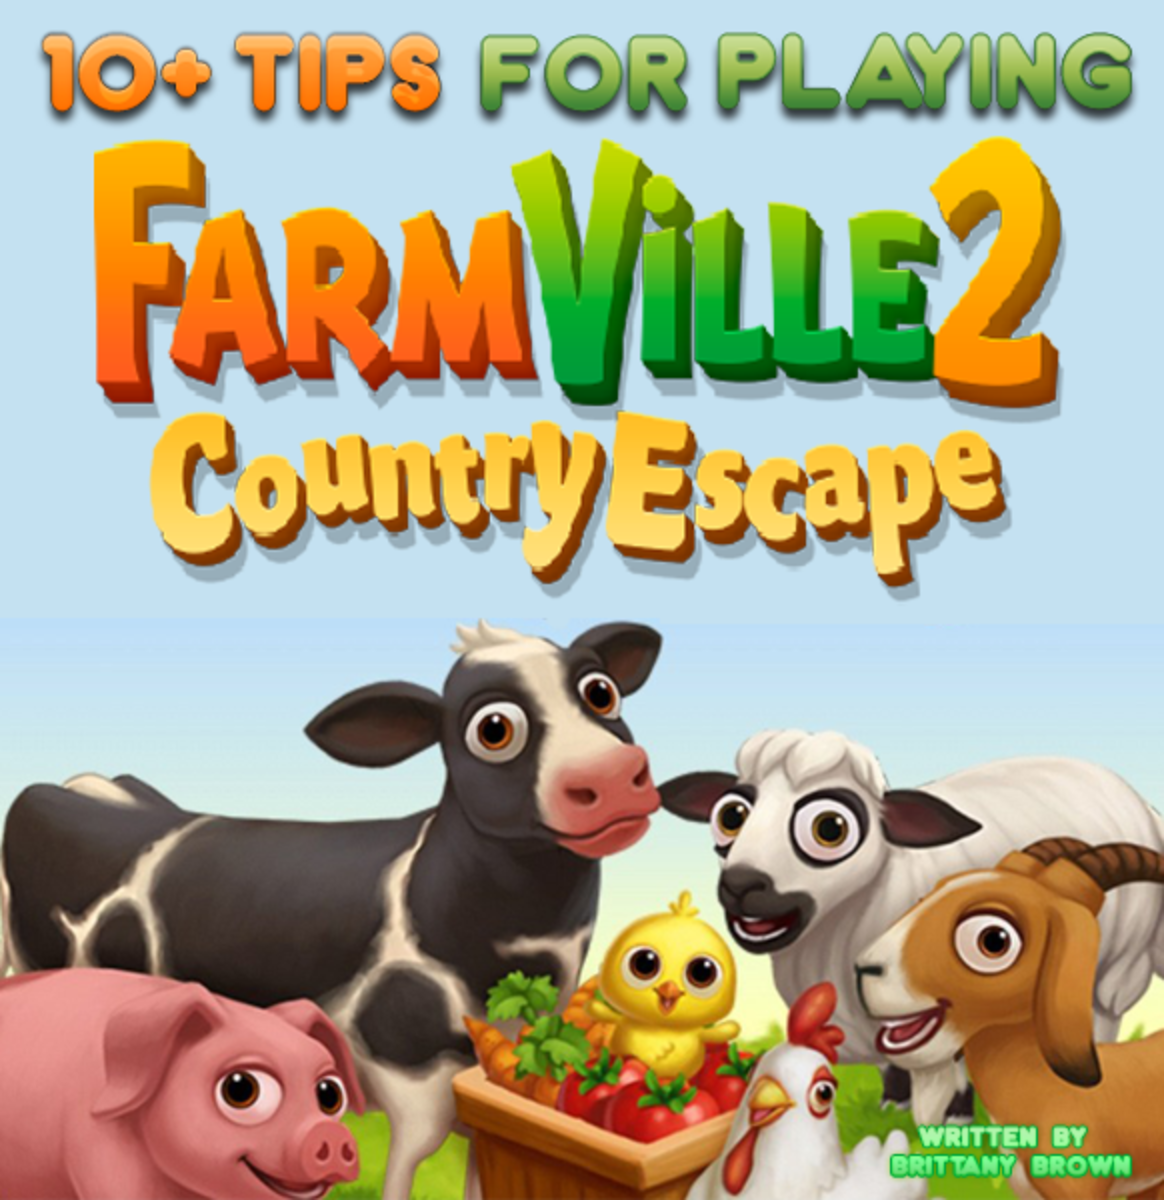 farmville 2 country escape animals & what they do